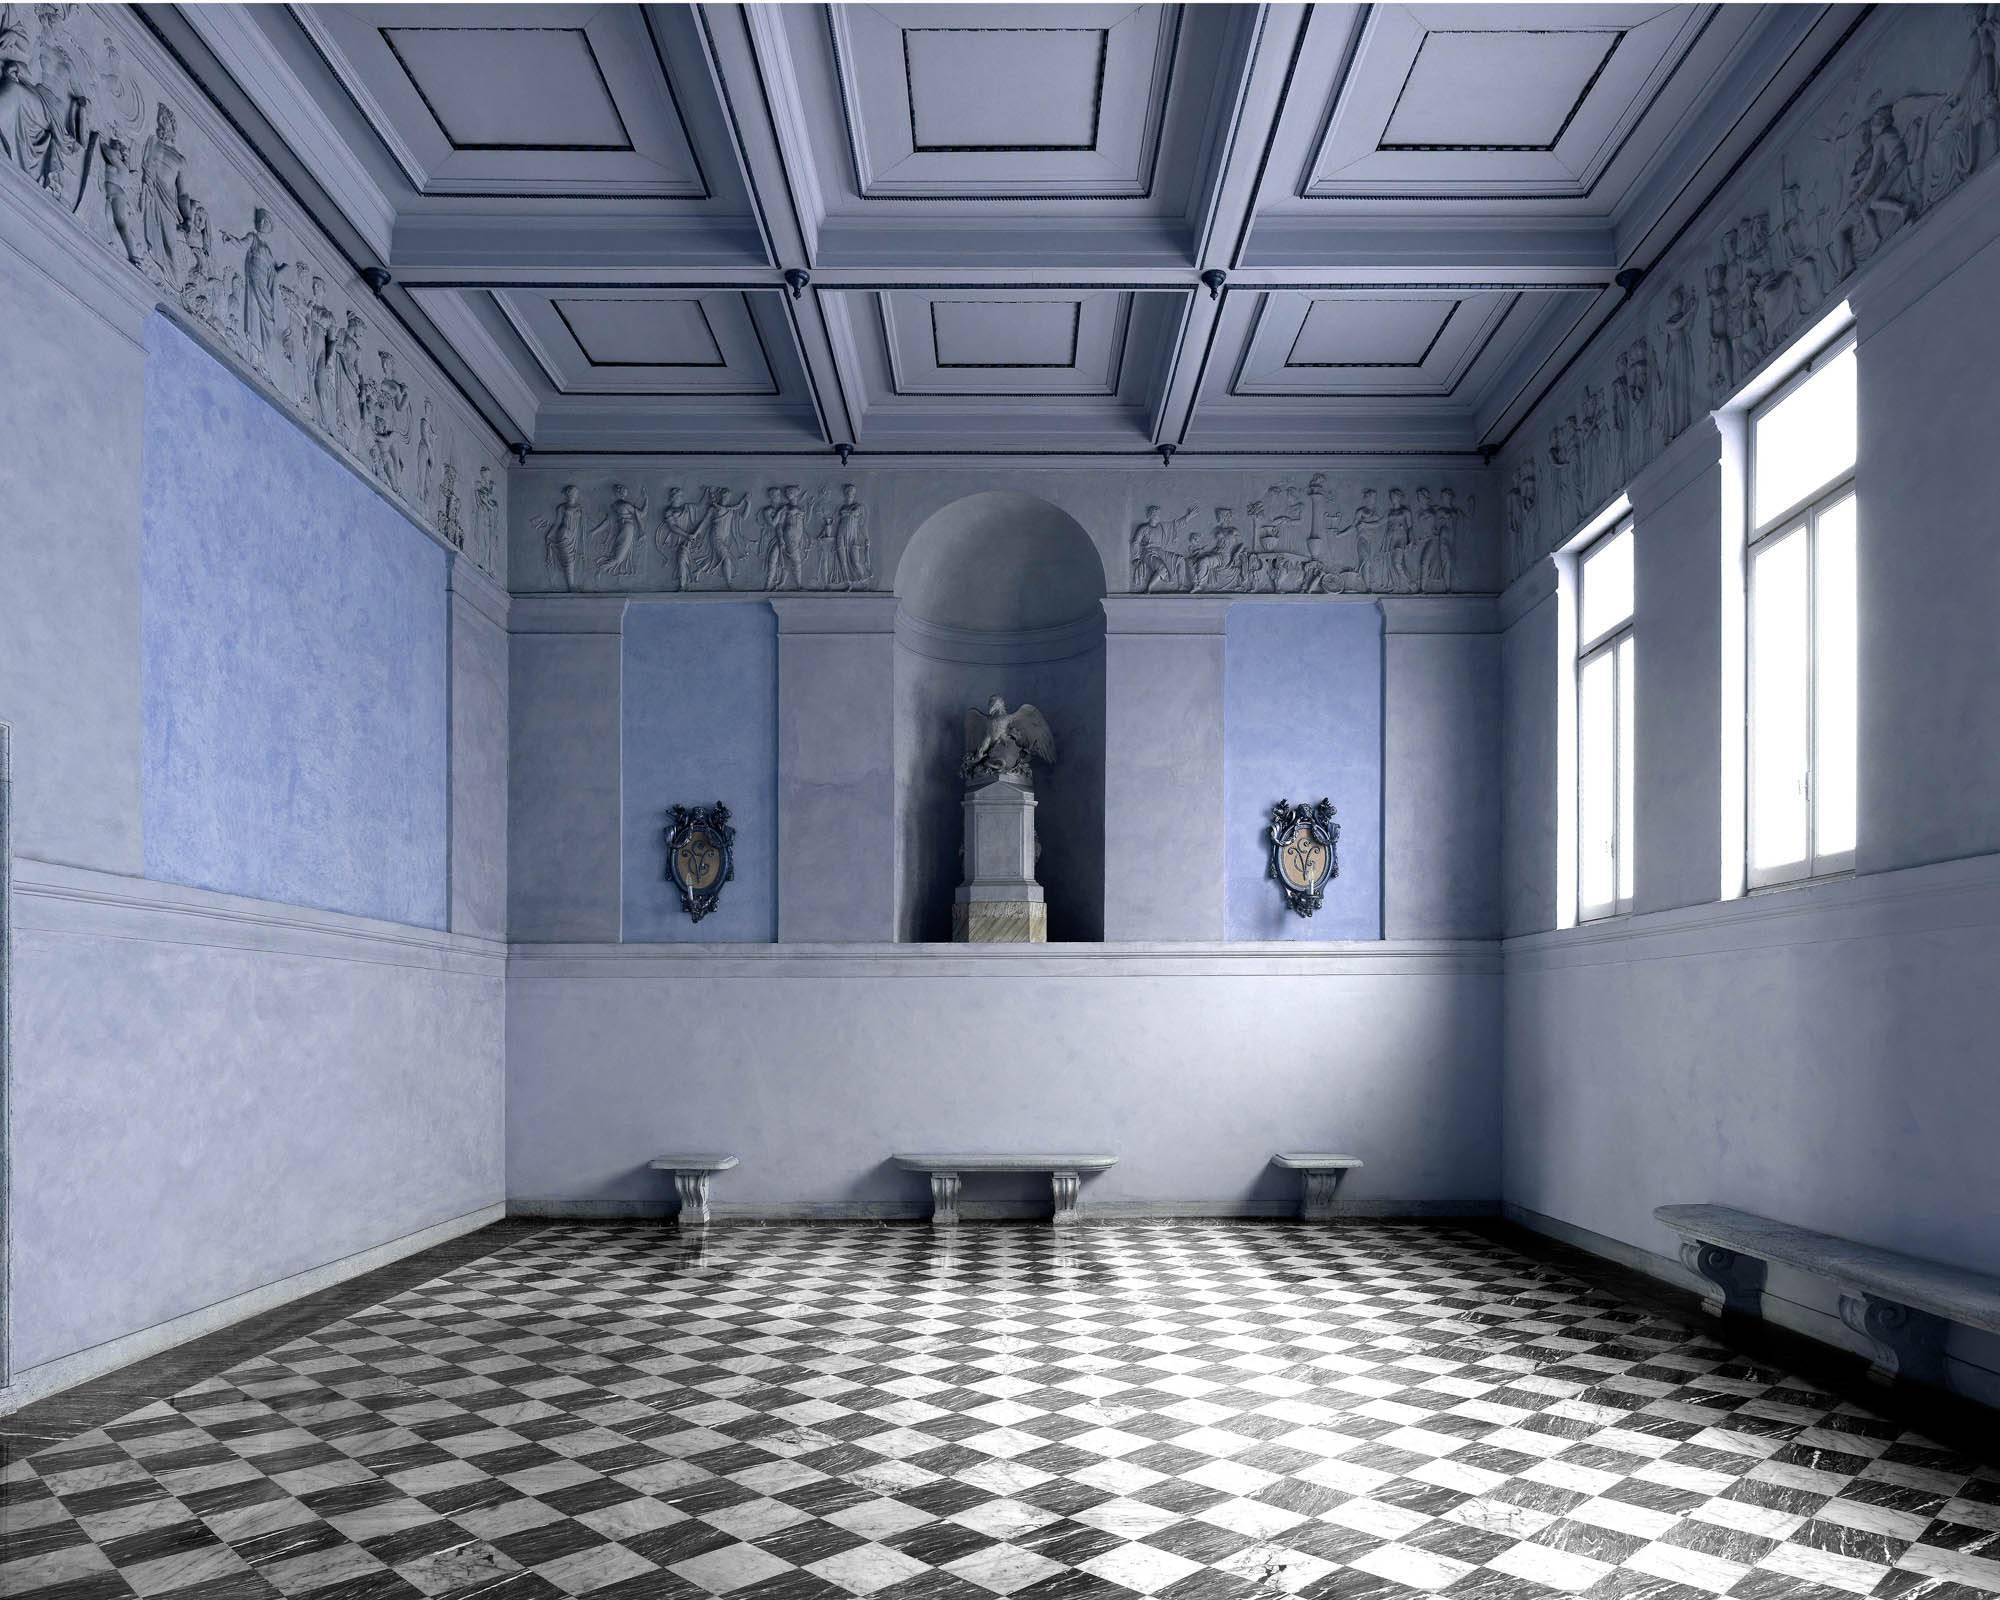 Palazzo del Quirinale Sala Napoleonica 2015
C Print
Signed, numbered, and dated on verso label

39.5 x 47.5 inches  edition of 5
47.5 x 59 inches  edition of 5
71 x 88.5 inches  edition of 5

framing options also available 
The photographer is based